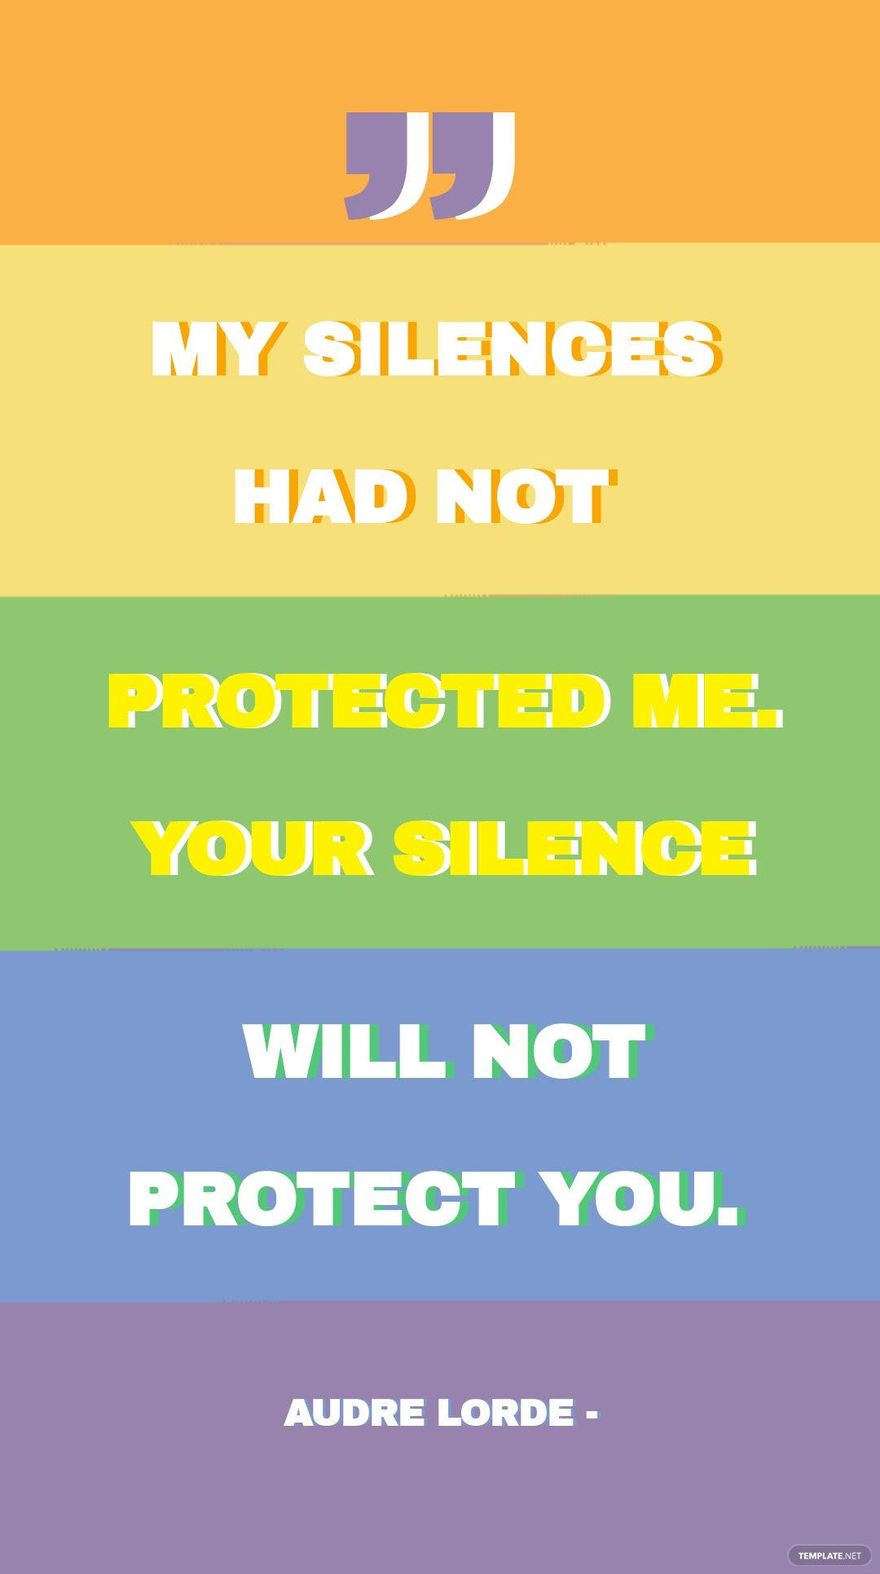 Audre Lorde - My silences had not protected me. Your silence will not protect you.